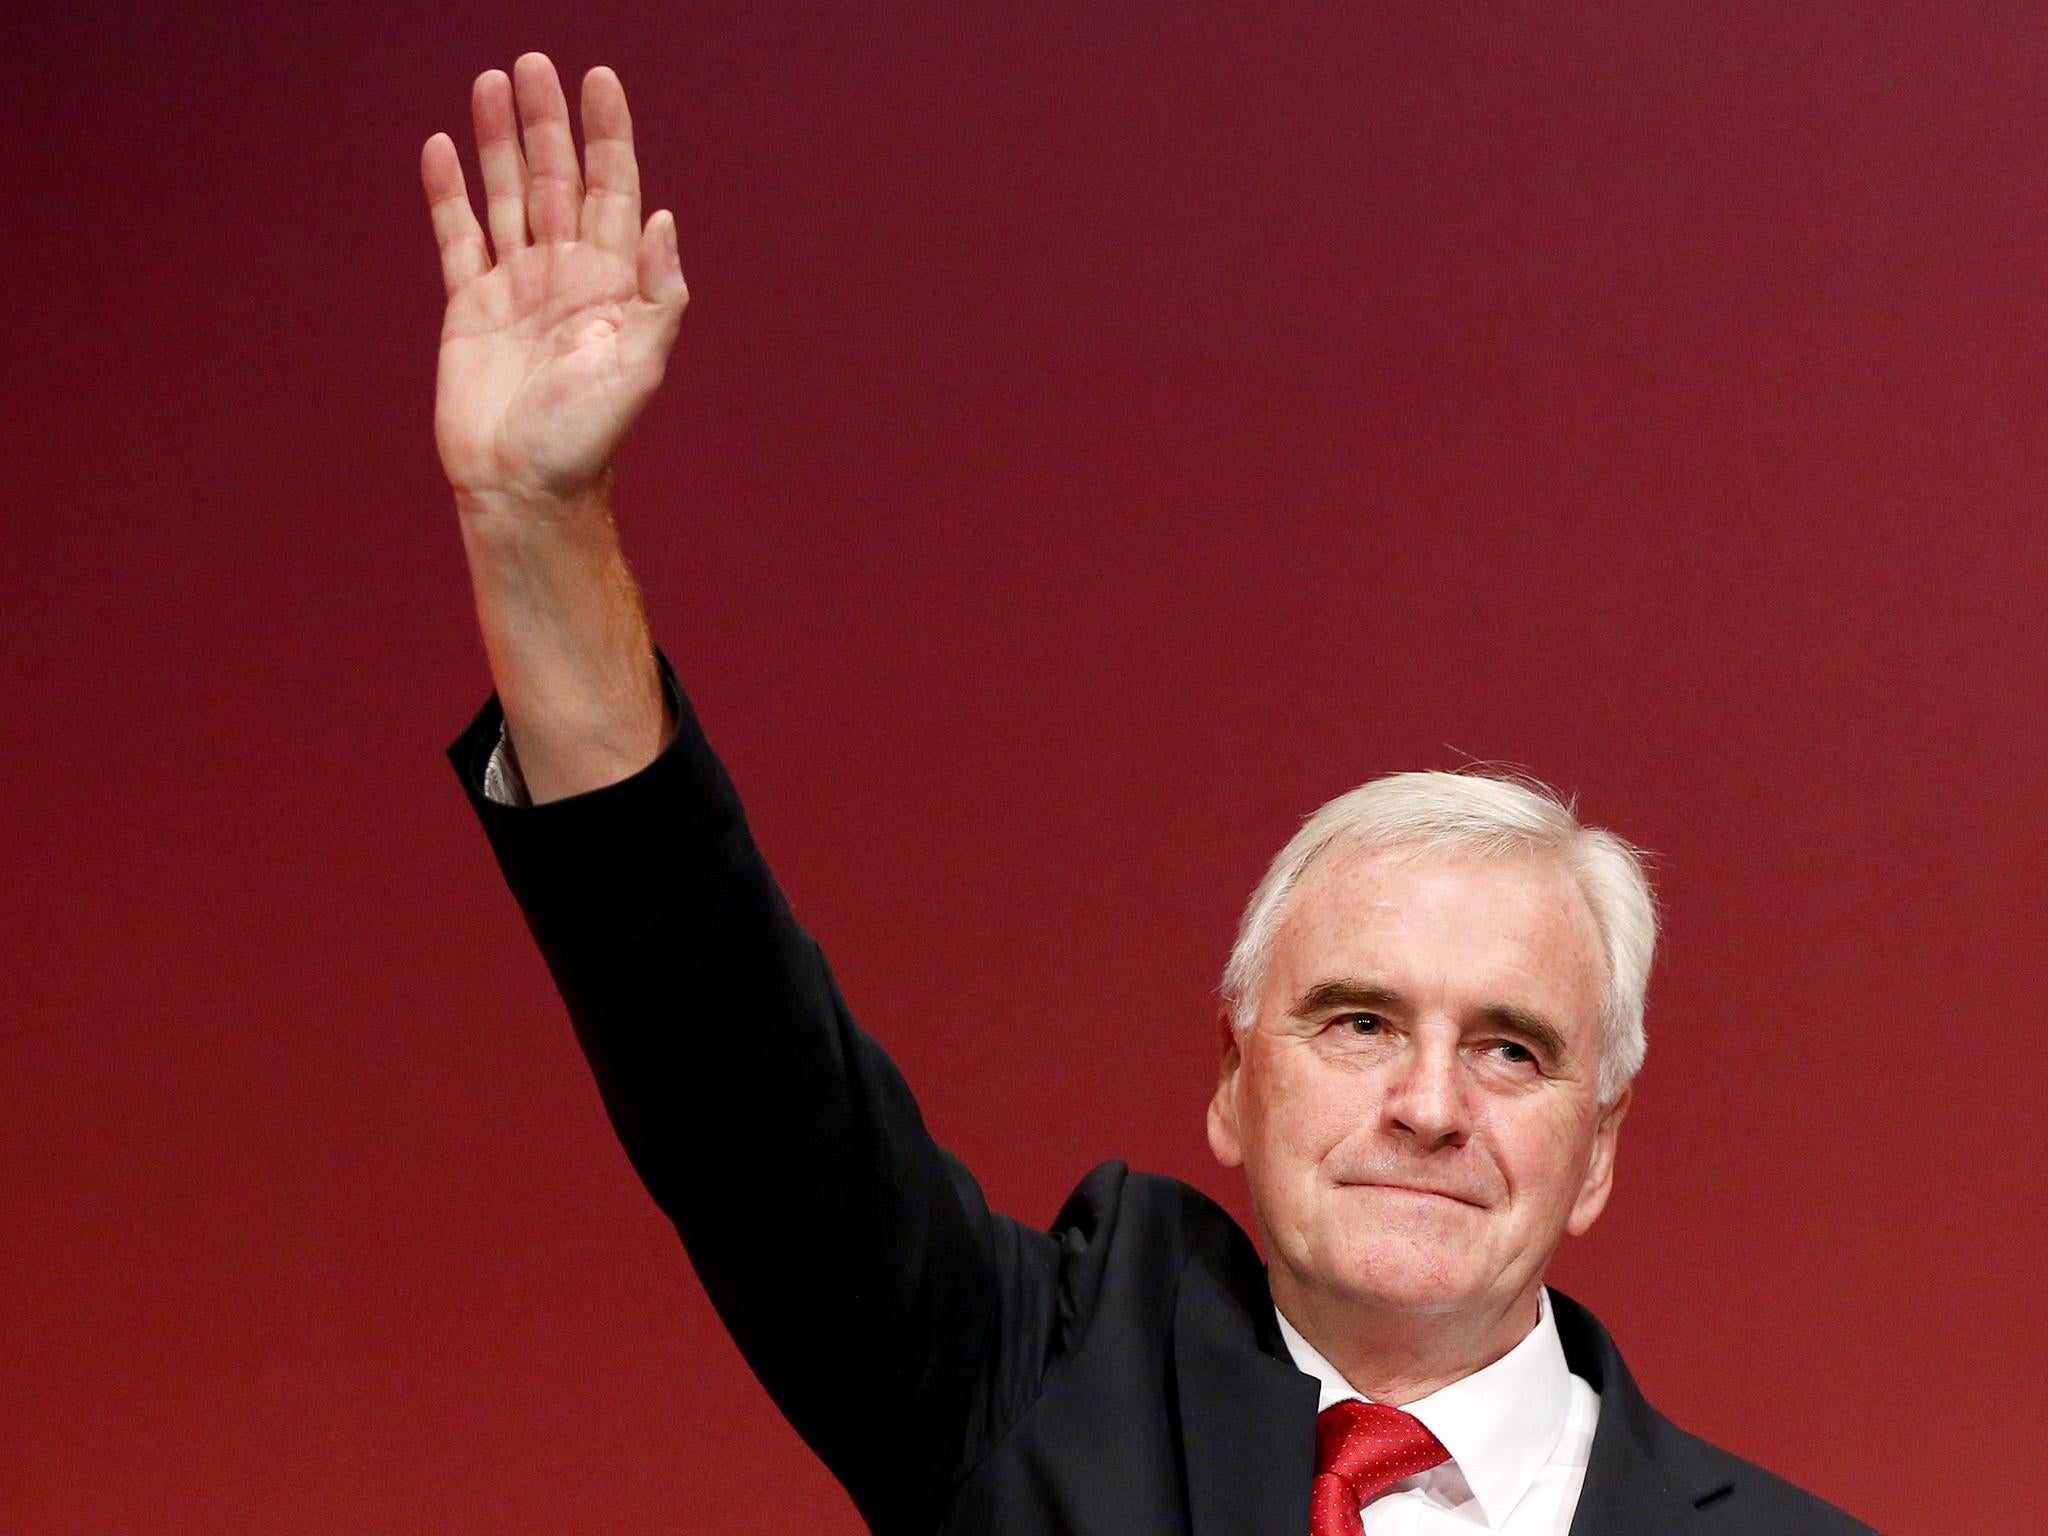 John McDonnell outlined Labour's economic policies at their party conference